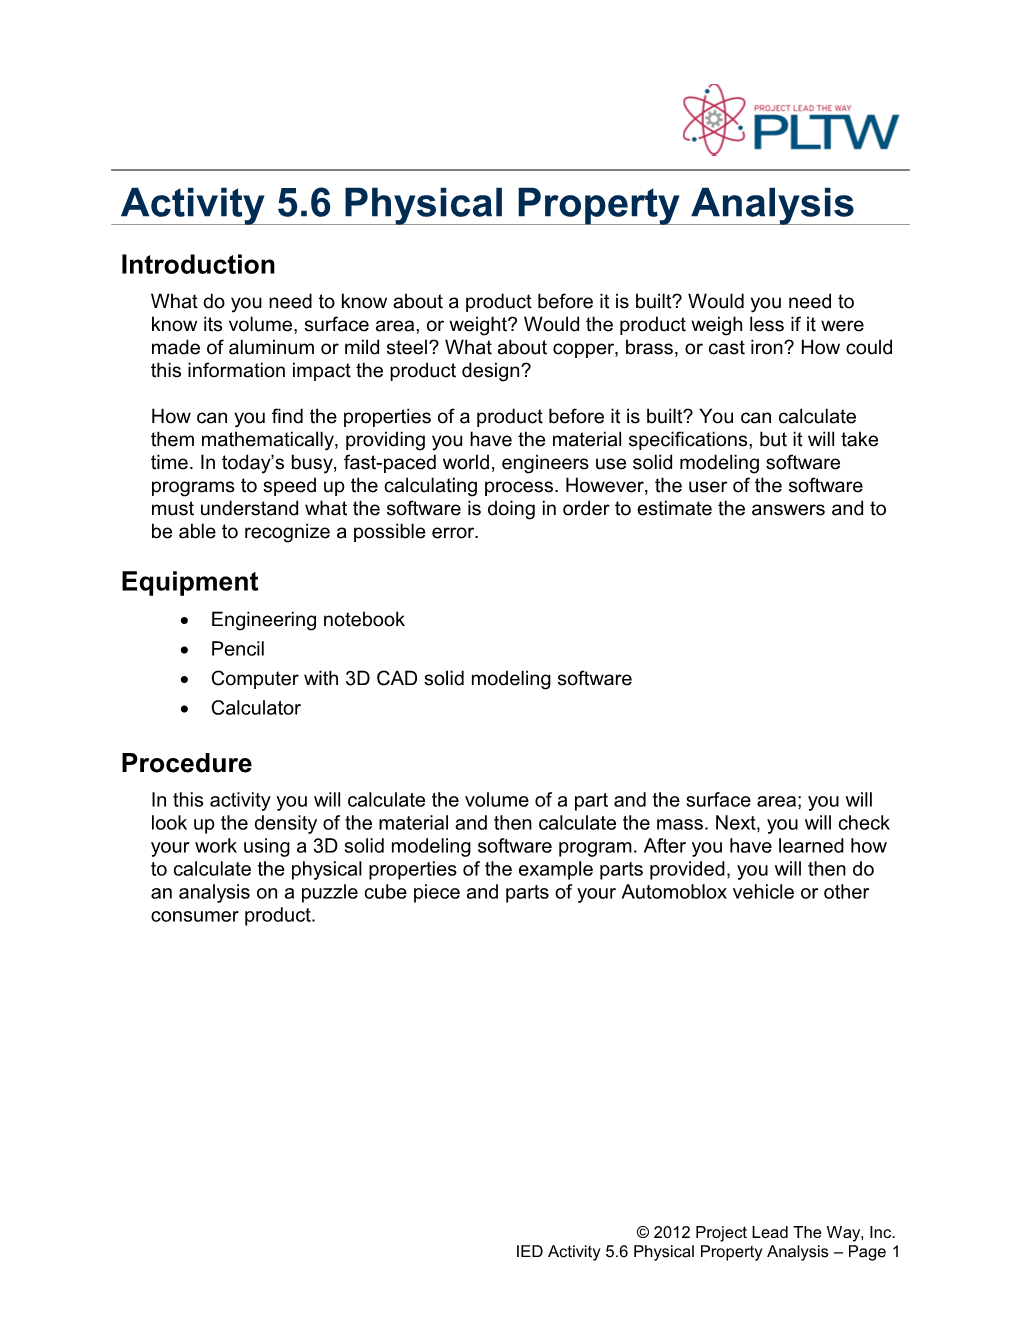 Activity 5.6 Physical Property Analysis